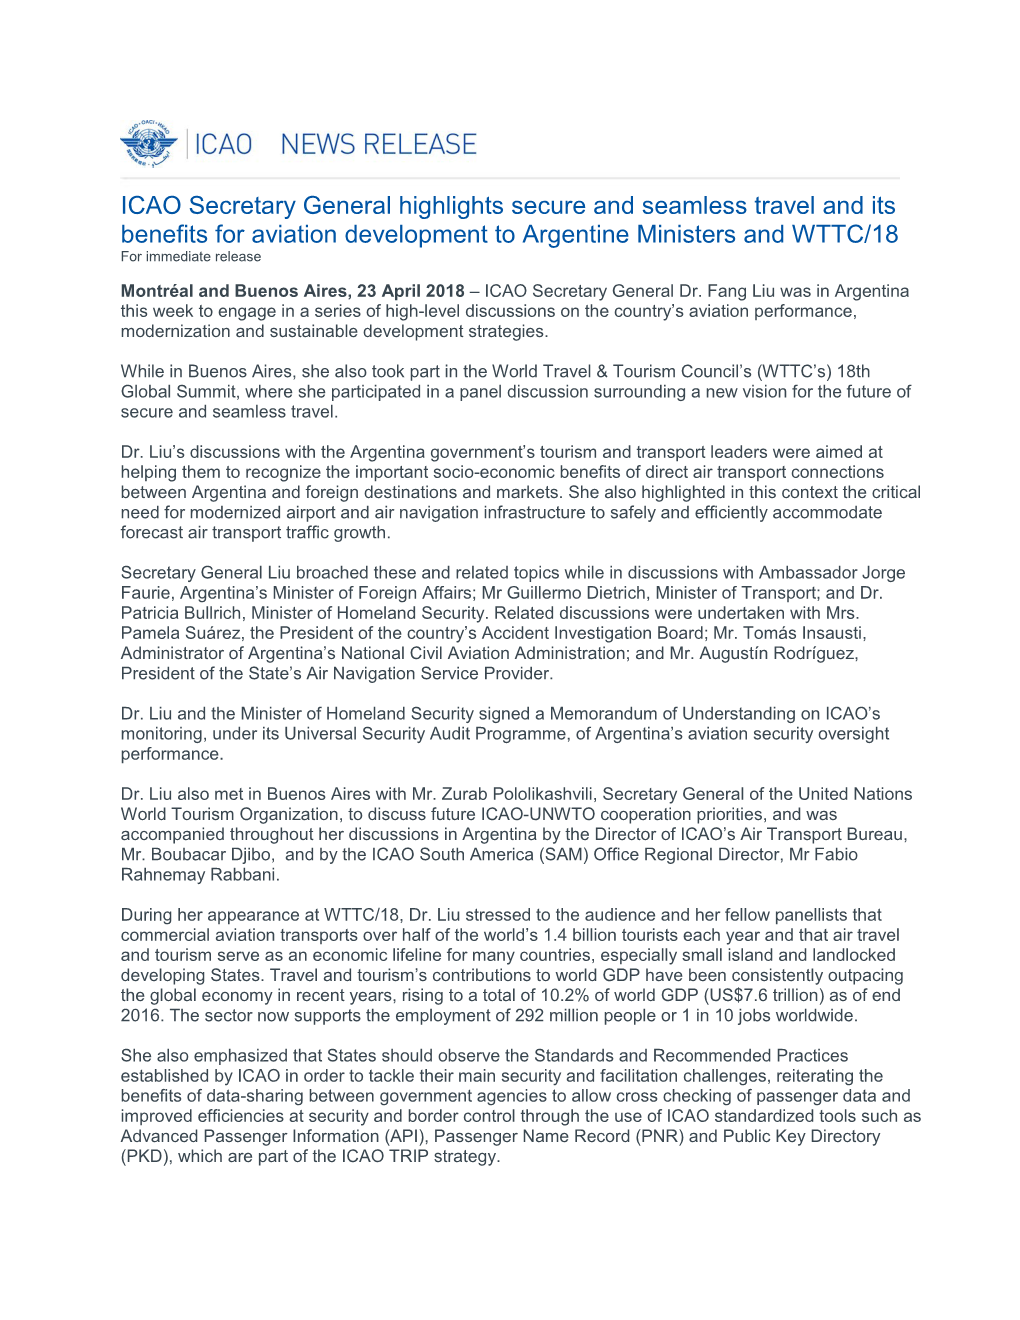 ICAO Secretary General Highlights Secure and Seamless Travel and Its Benefits for Aviation Development to Argentine Ministers and WTTC/18 for Immediate Release